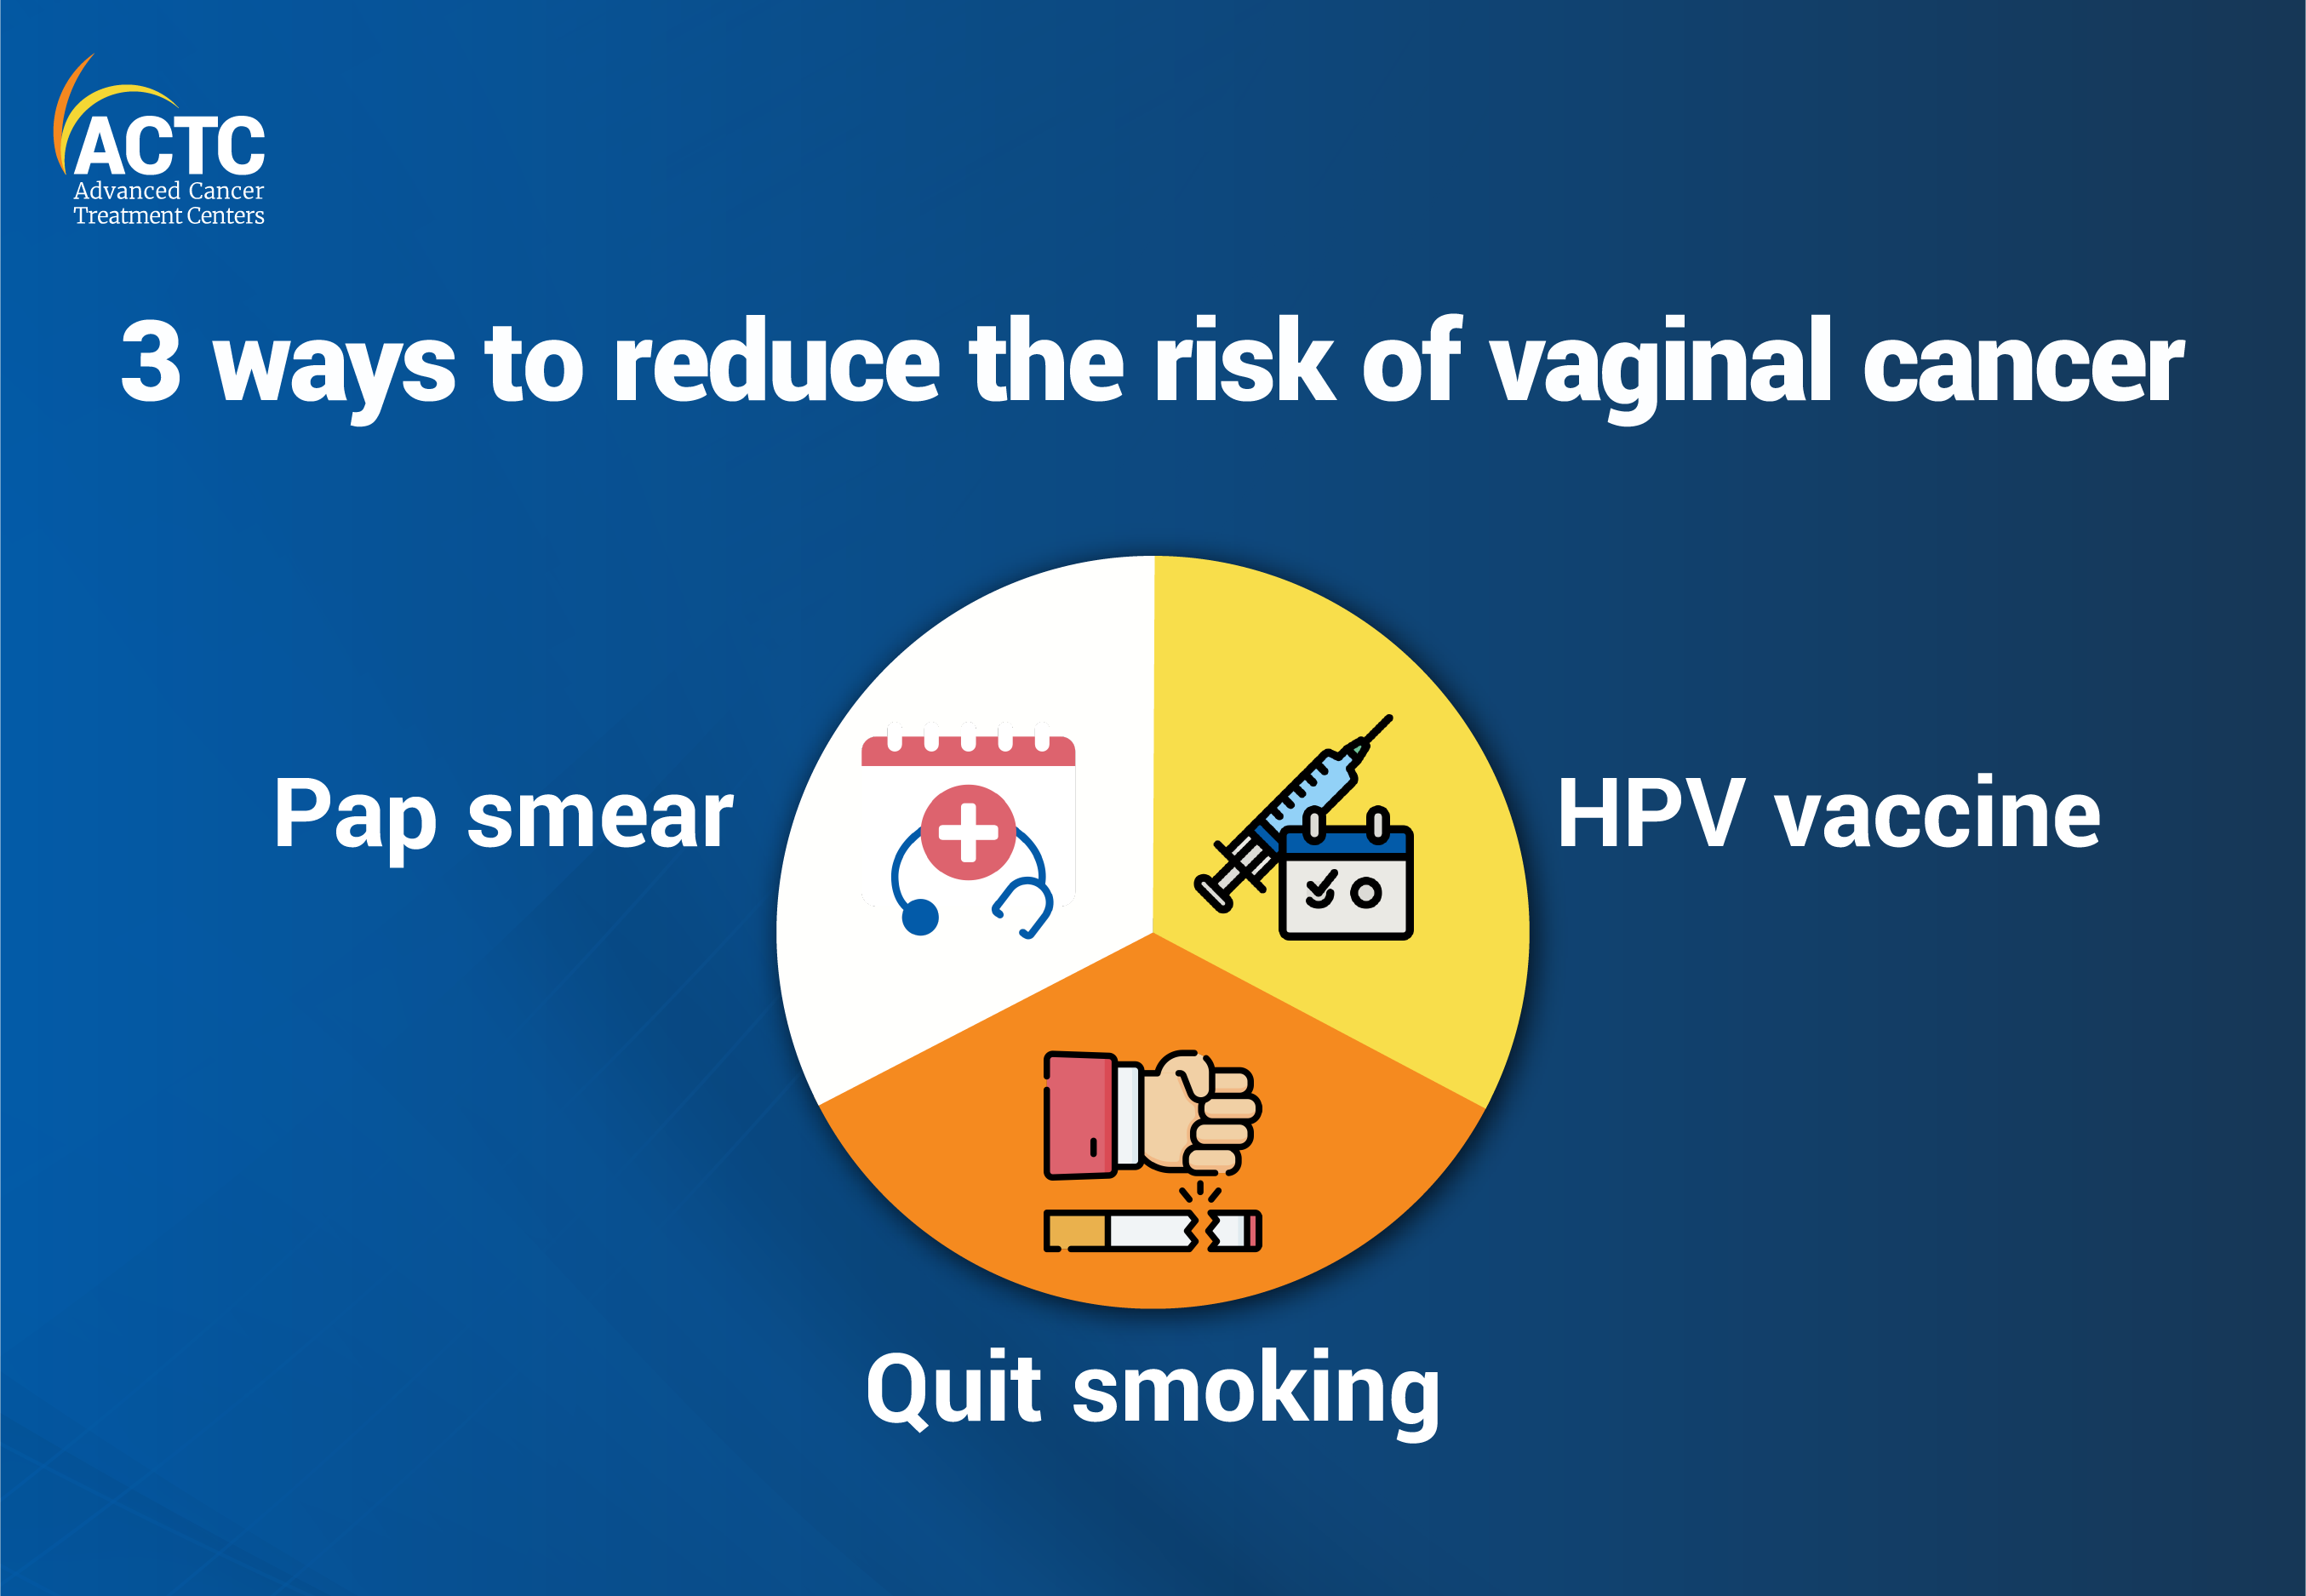 3 ways to reduce the risk of vaginal cancer